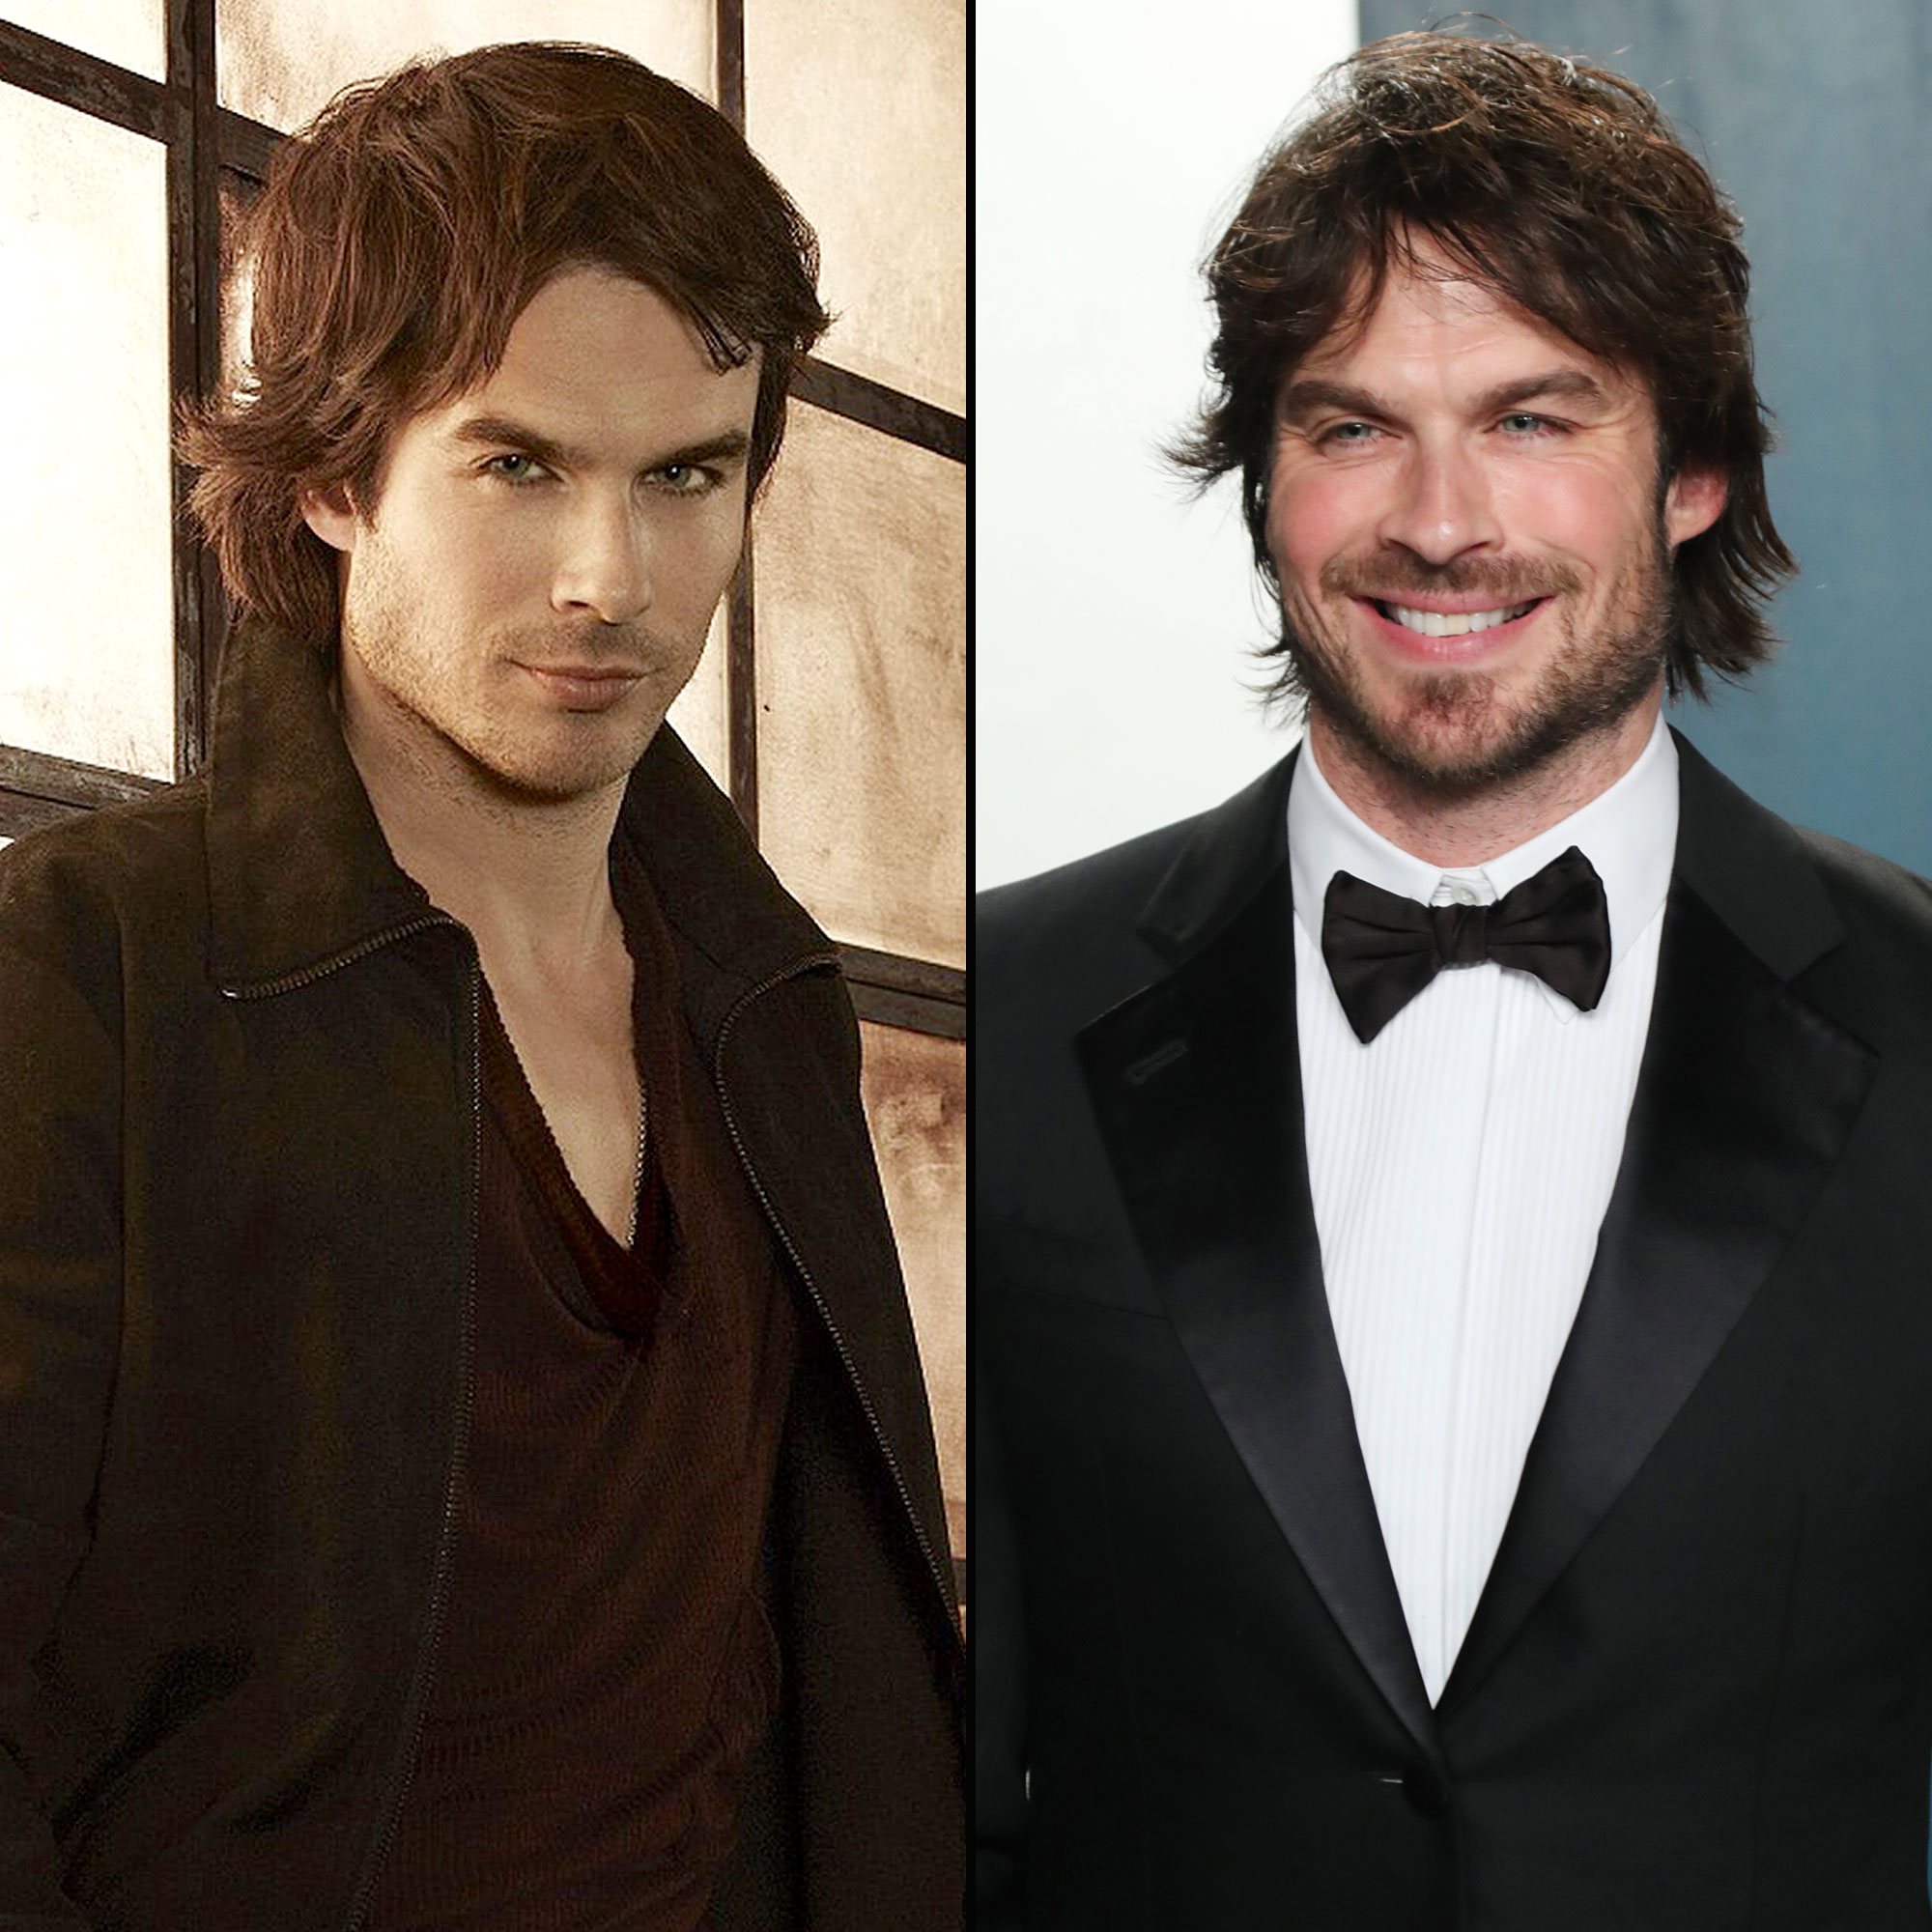 Vampire Diaries' Cast: Where Are They Now?